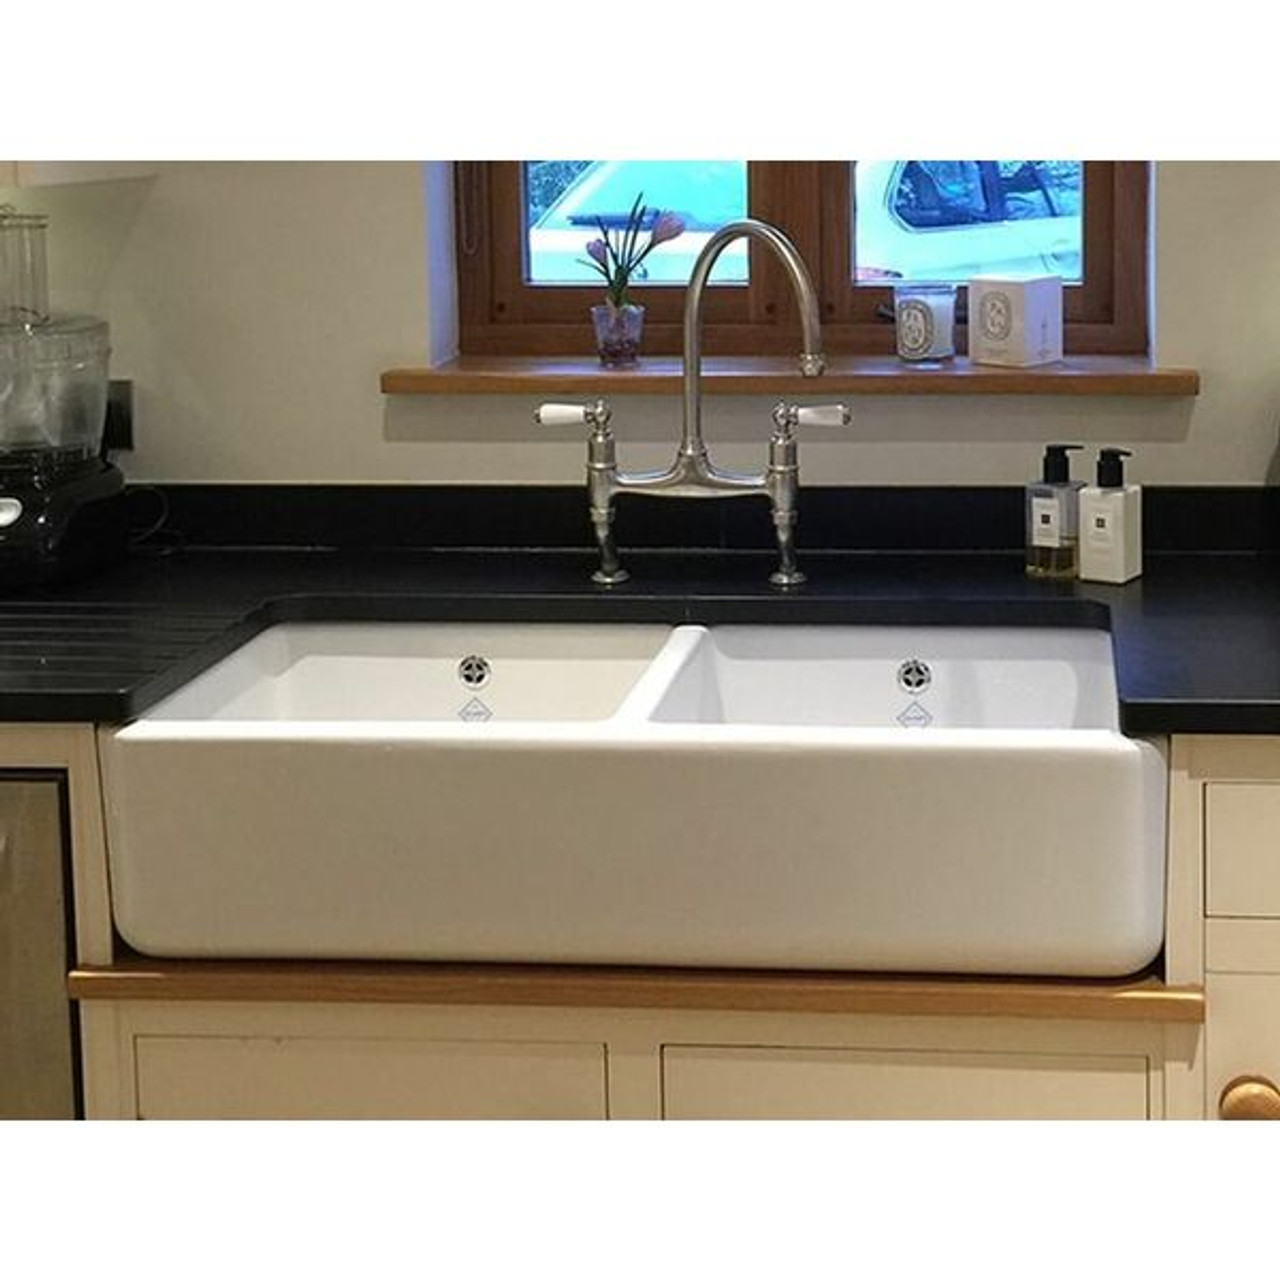 SCLD101WH - Shaws Double Bowl 1000 Fireclay Sink - White